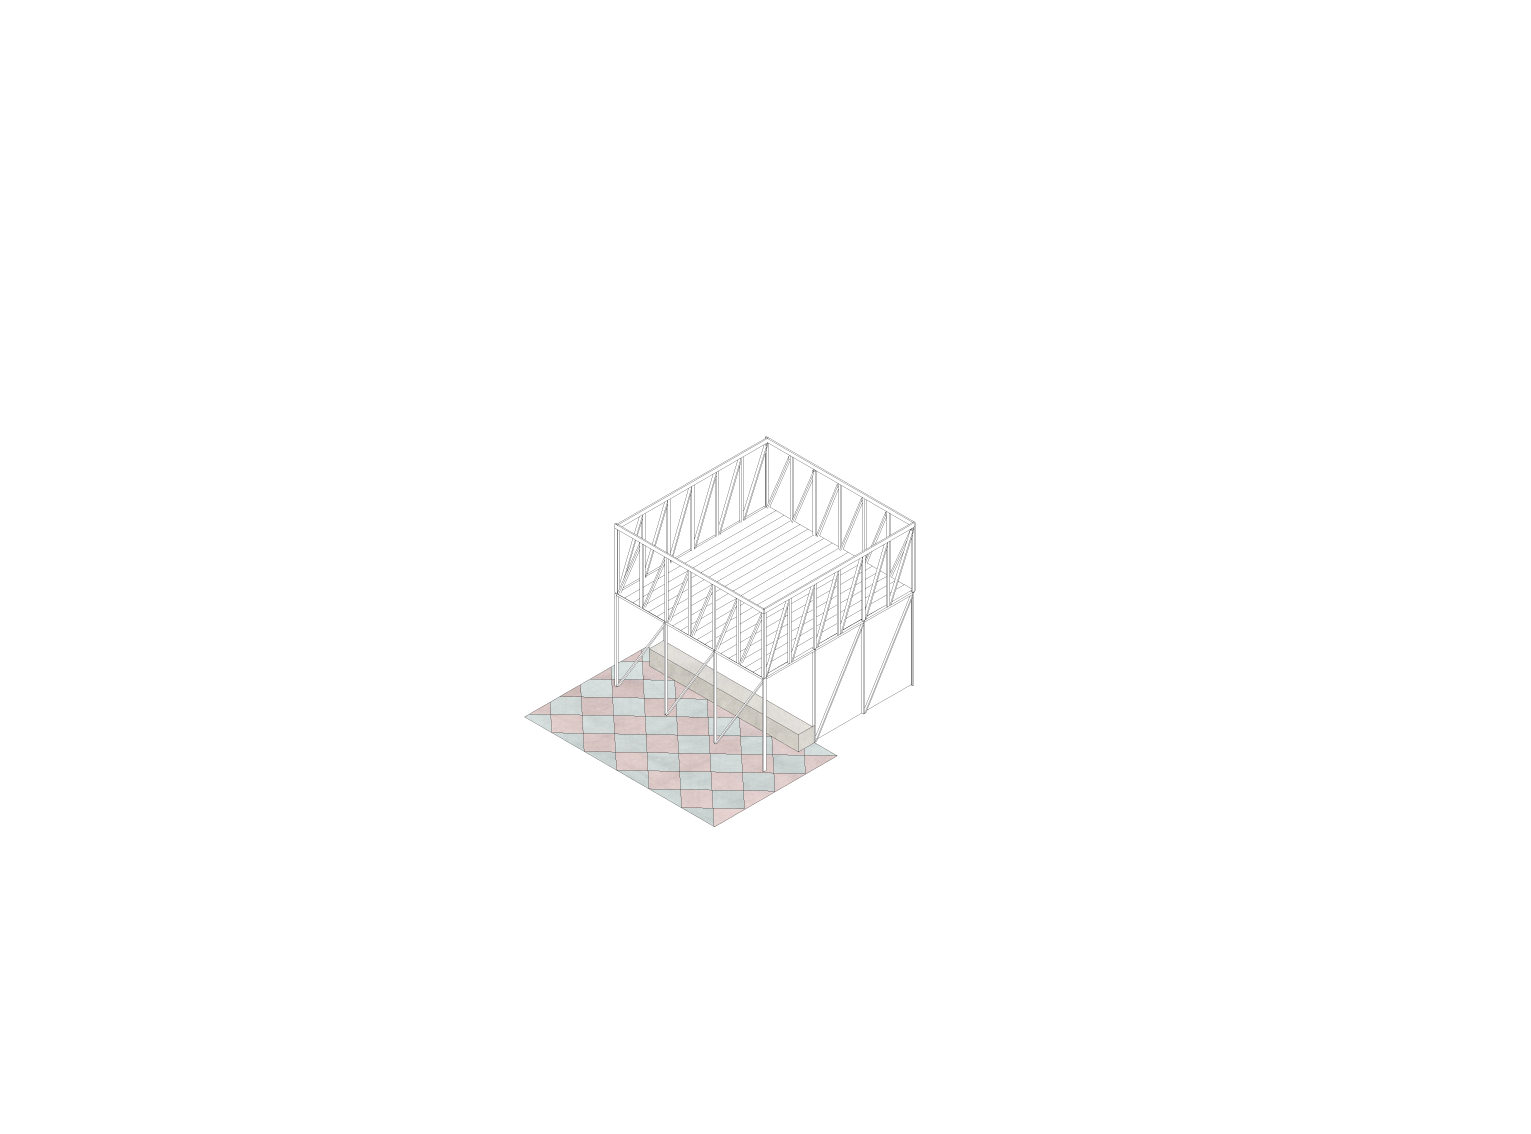 Drawn axonometric of a room scale folly.